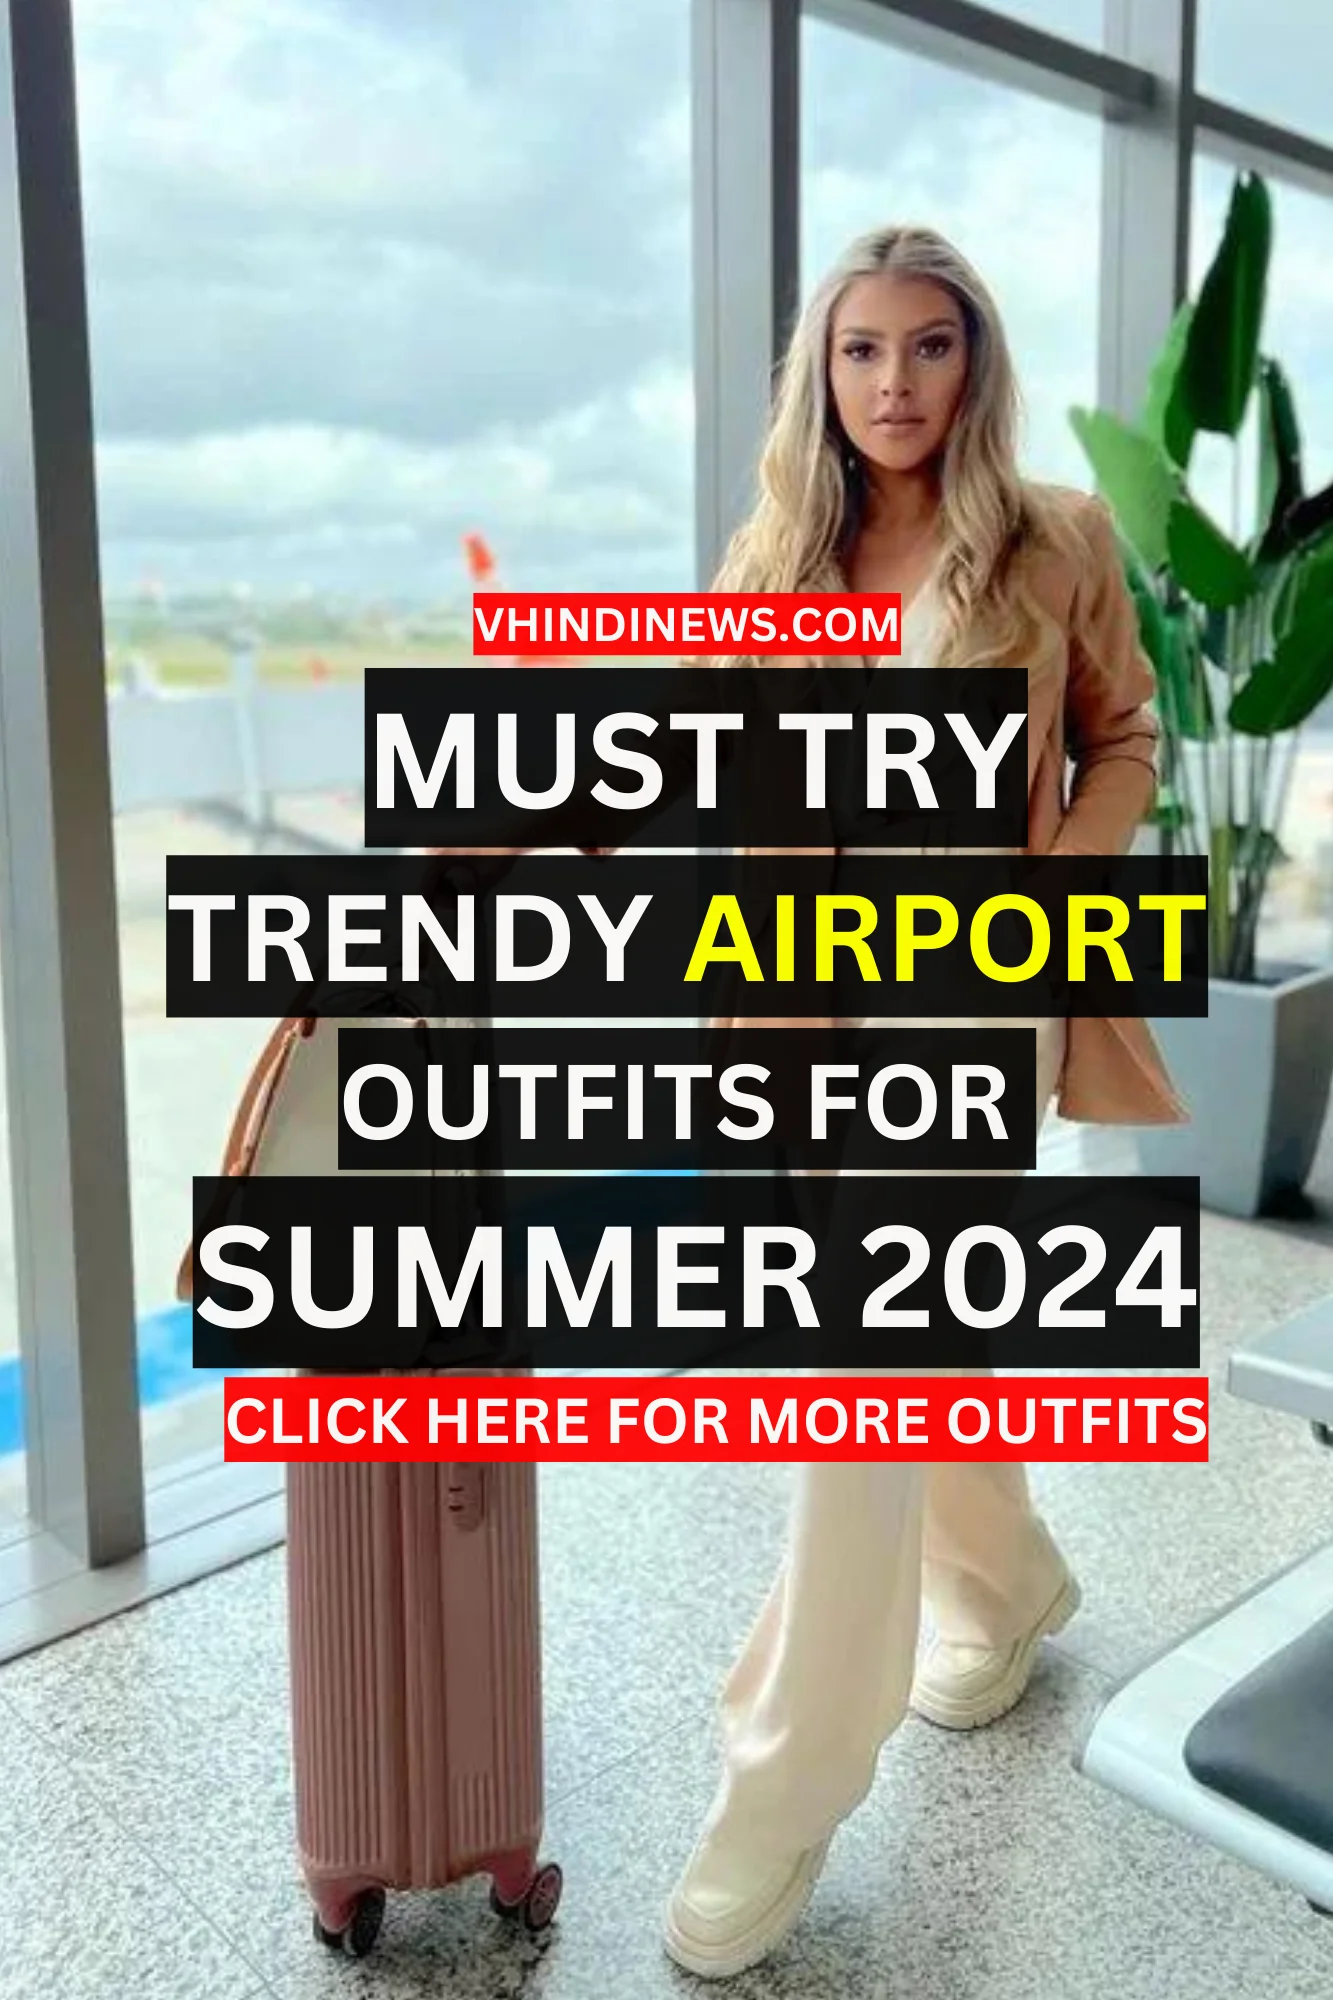 AIRPORT OUTFIT FOR SUMMER 2024 2